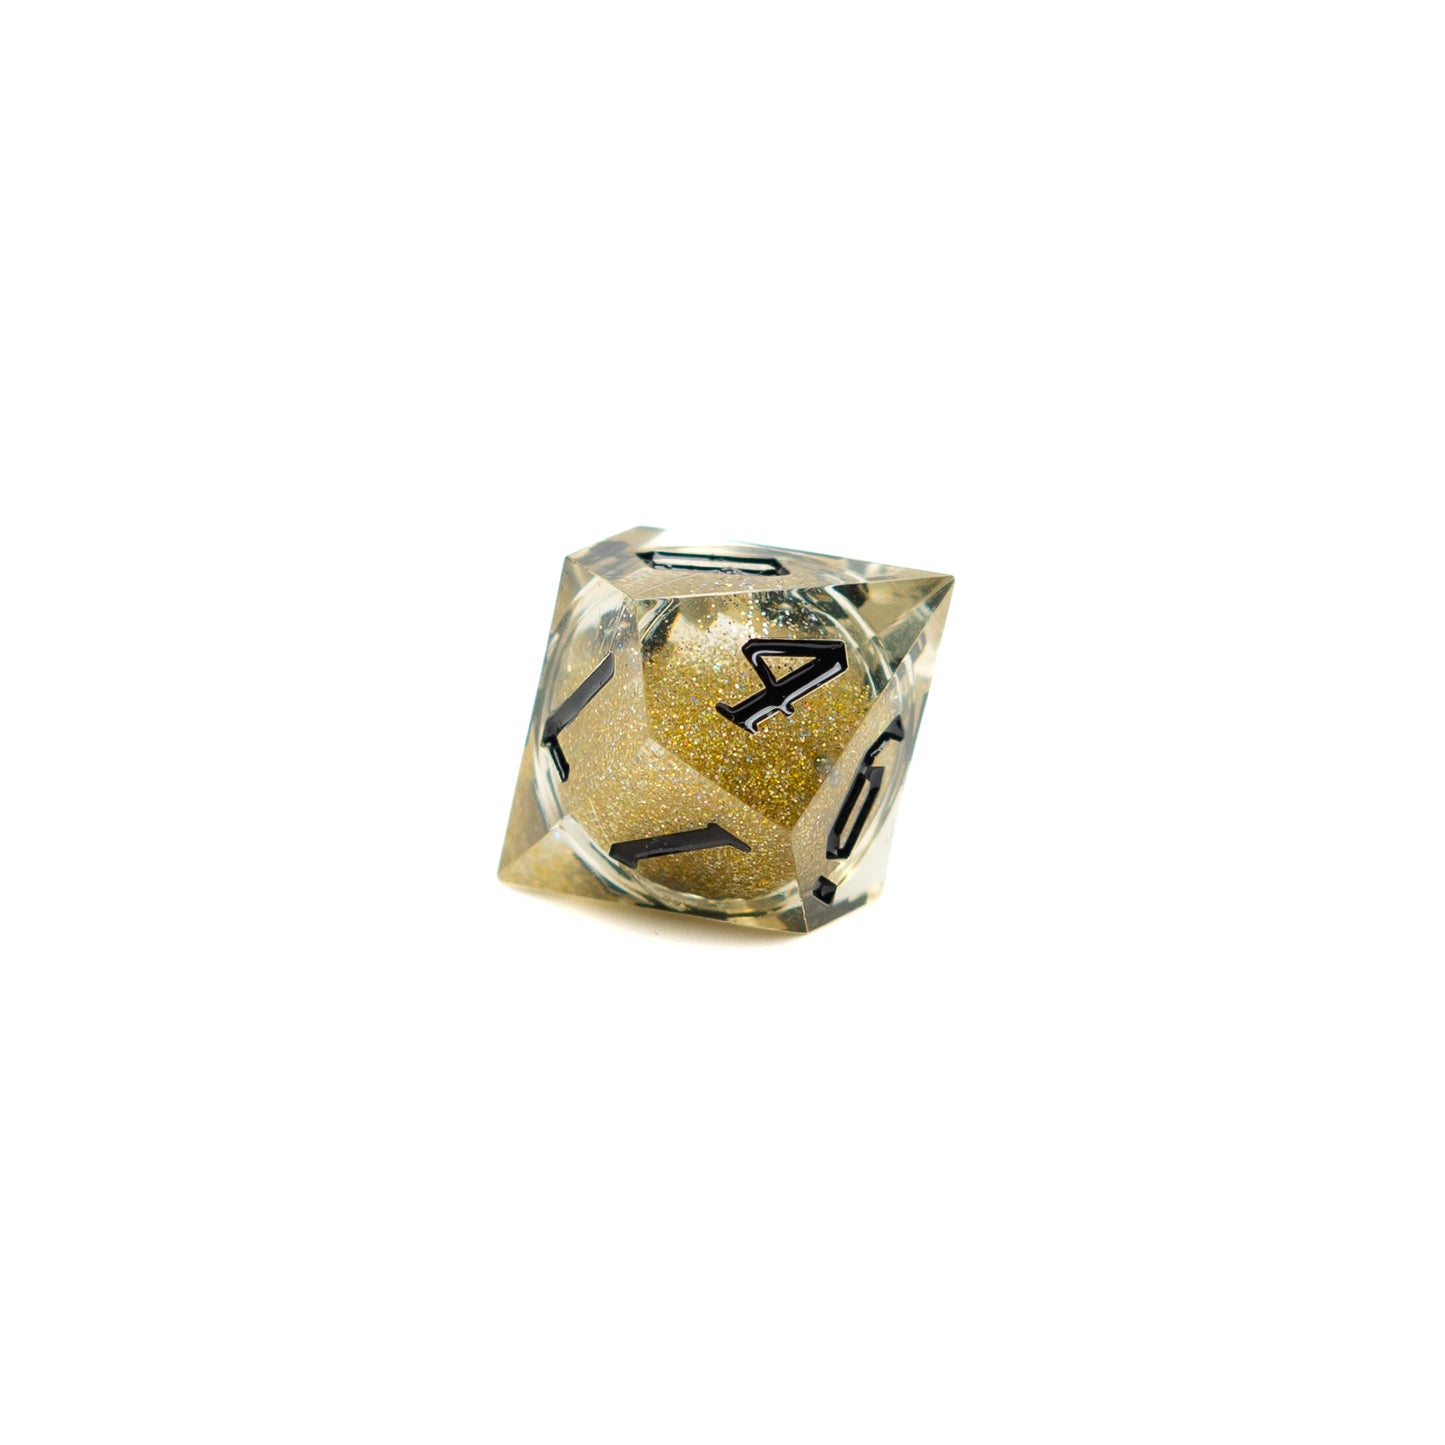 Roll Britannia Sharp Edge Resin Liquid Core Dungeons and Dragons D10 Dice with Gold Glitter Aesthetic